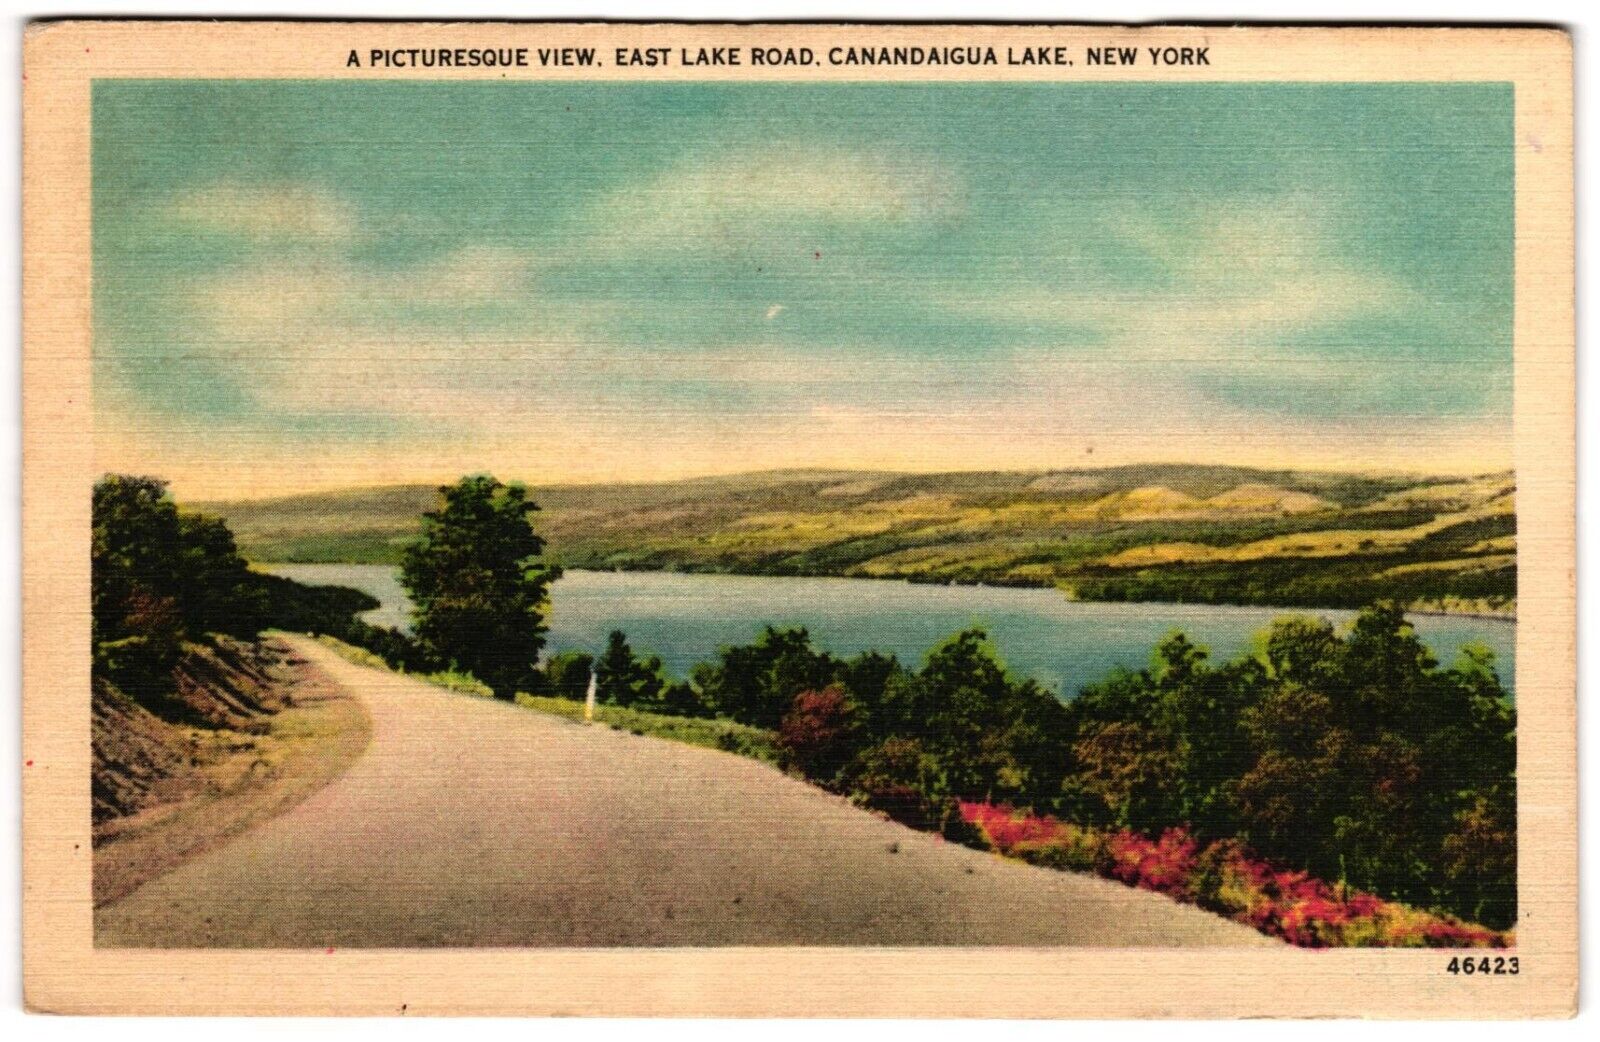 A Picturesque View of East Lake Road Canandaigua Lake NY c1940s Postcard